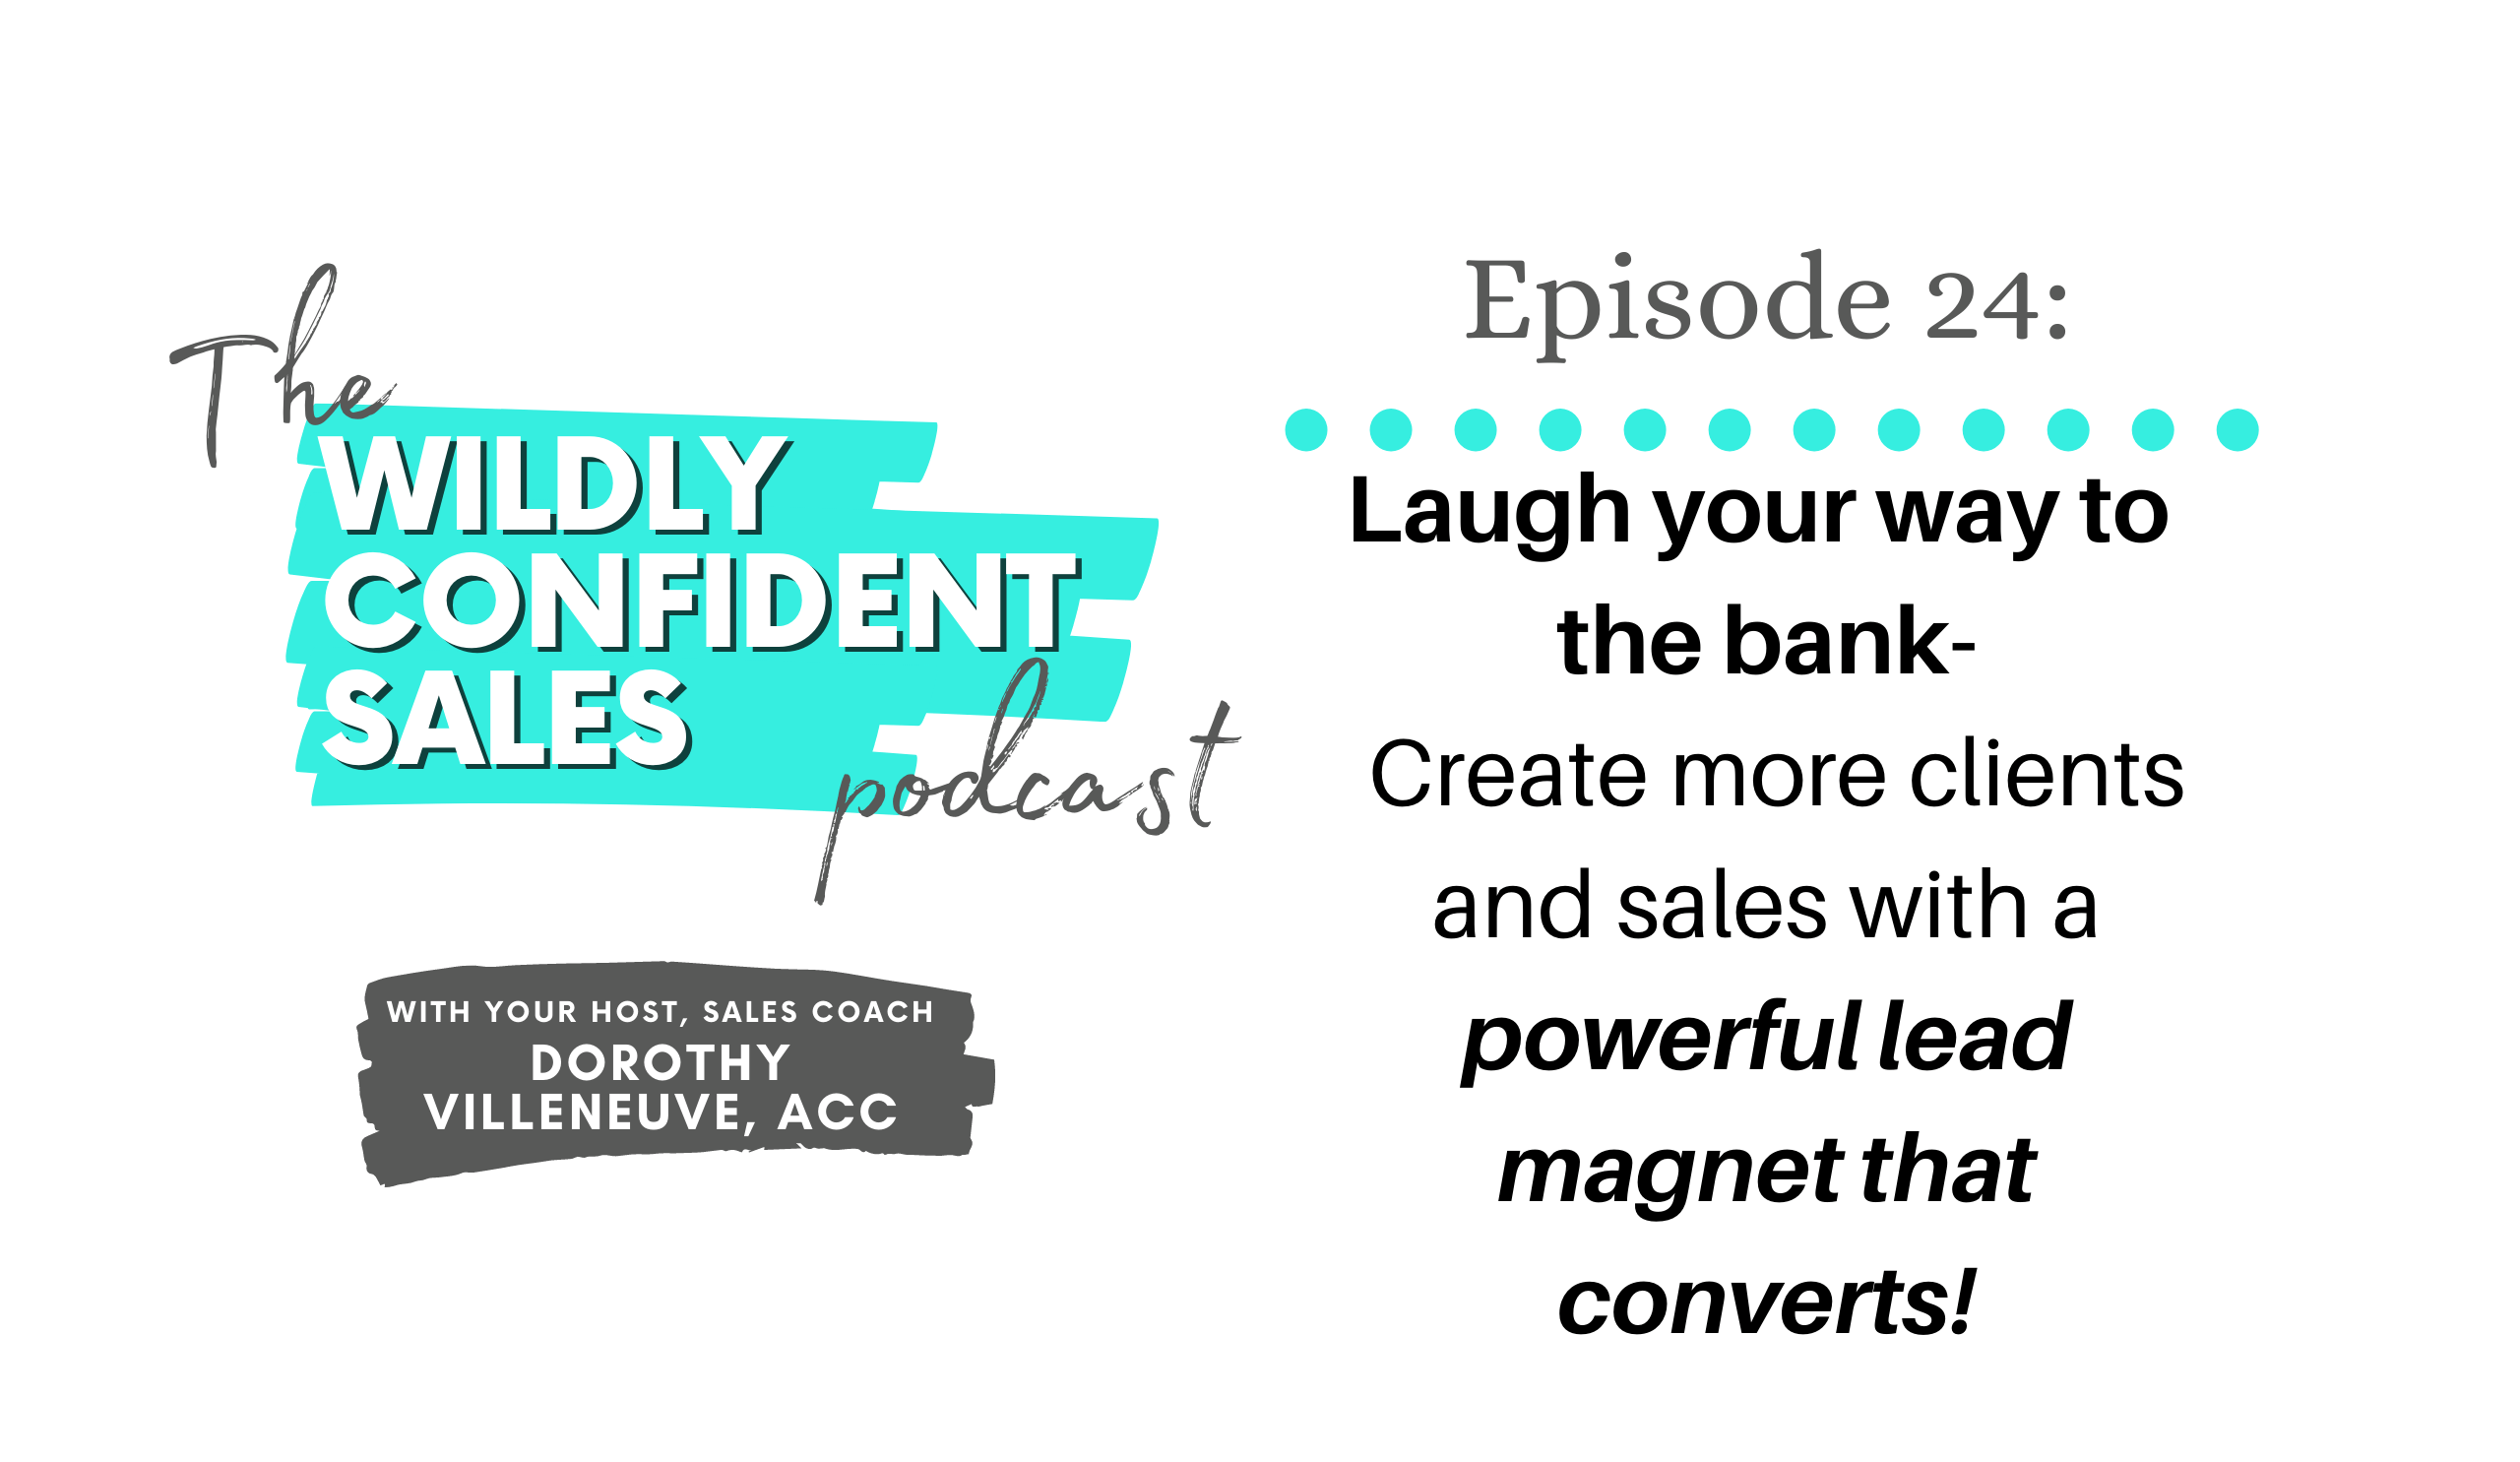 Laugh Your Way to the Bank – Create More Clients and Sales with a Powerful Lead Magnet that Converts